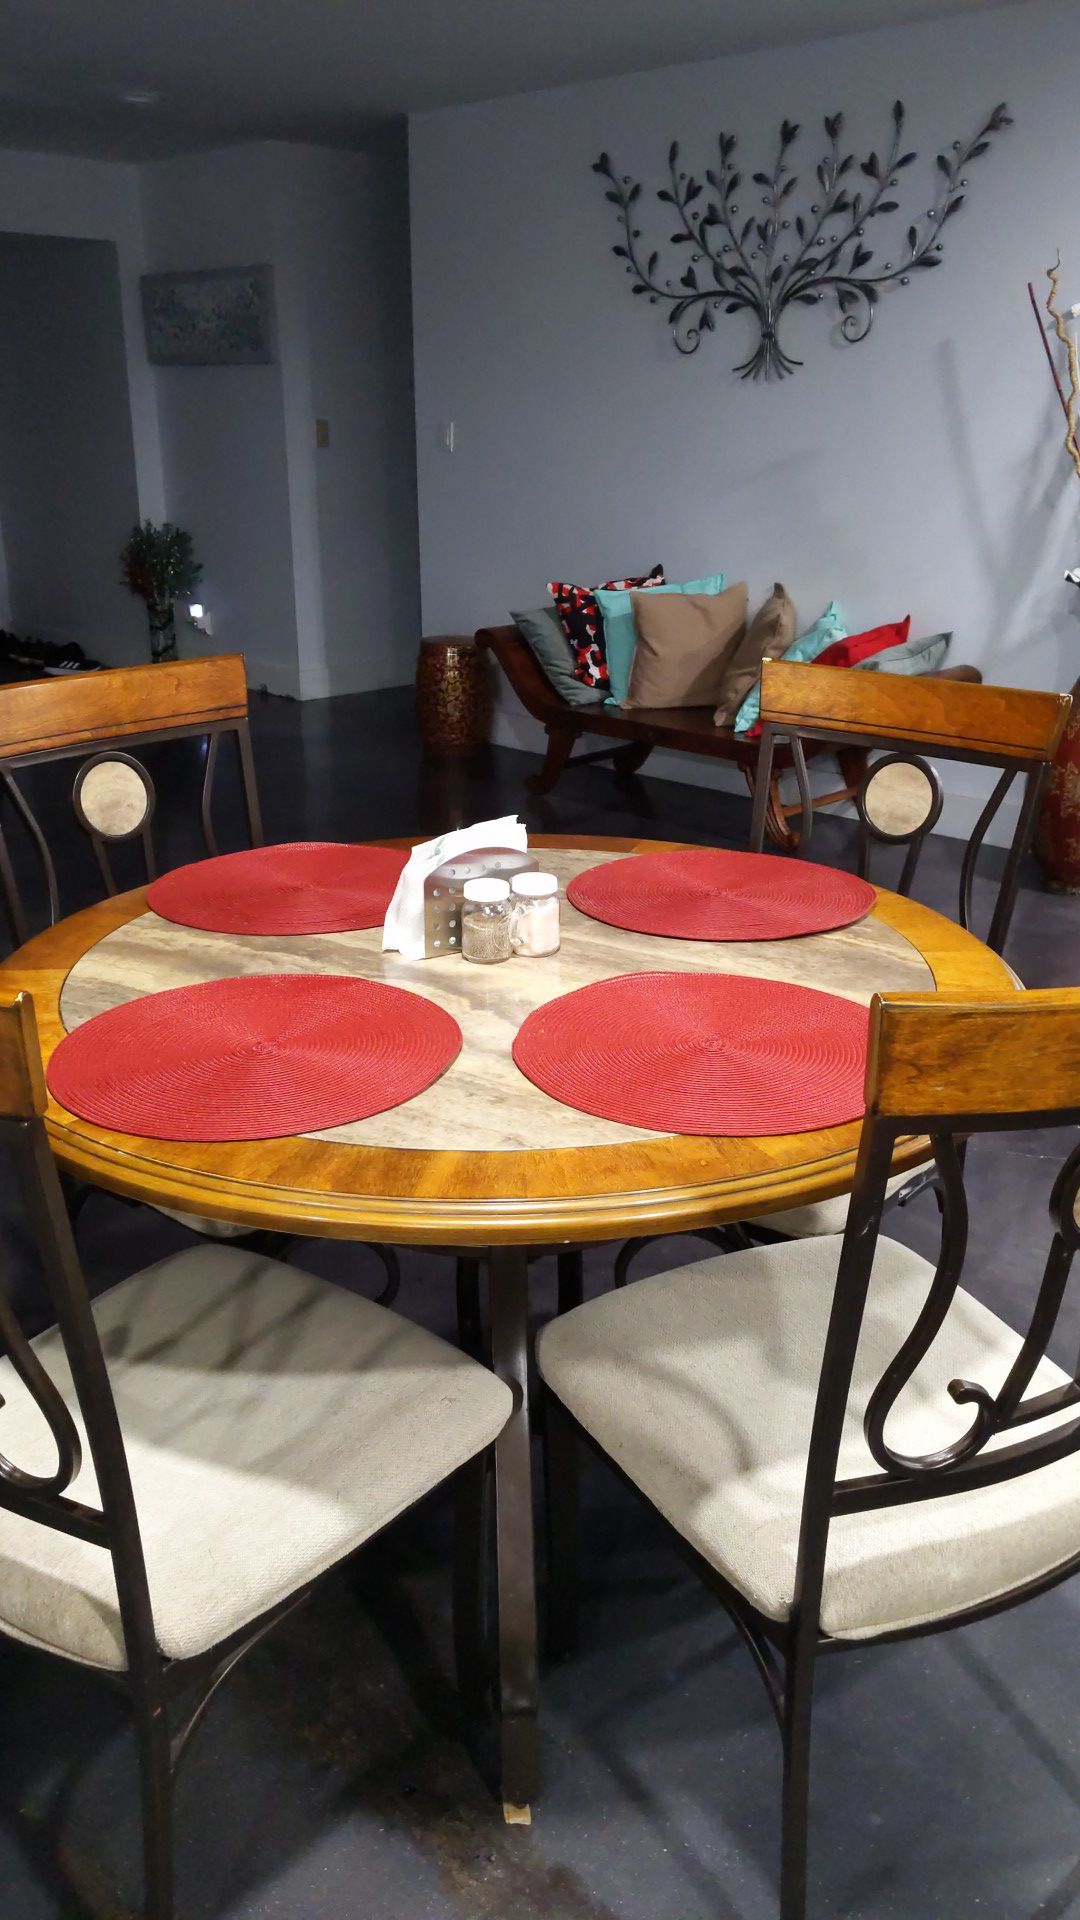 Round table wooden table with 4 chairs